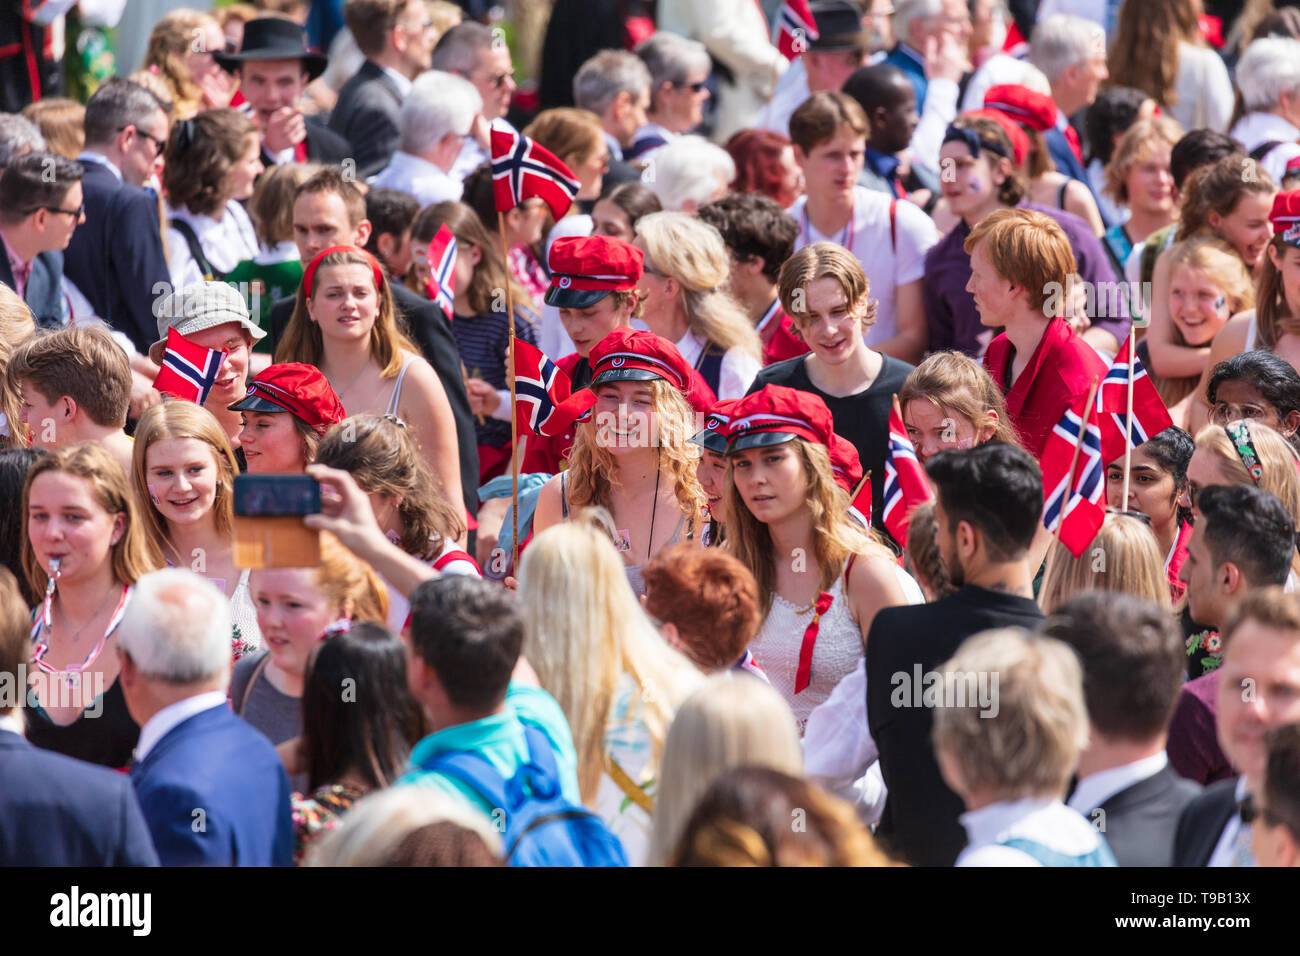 Norway, Oslo - May 17, 2019. Norwegians in all ages and dressed up in  traditional costumes parade Slottsplassen during the annual celebration of  the Norwegian Constitution Day, also referred to as Sytttende